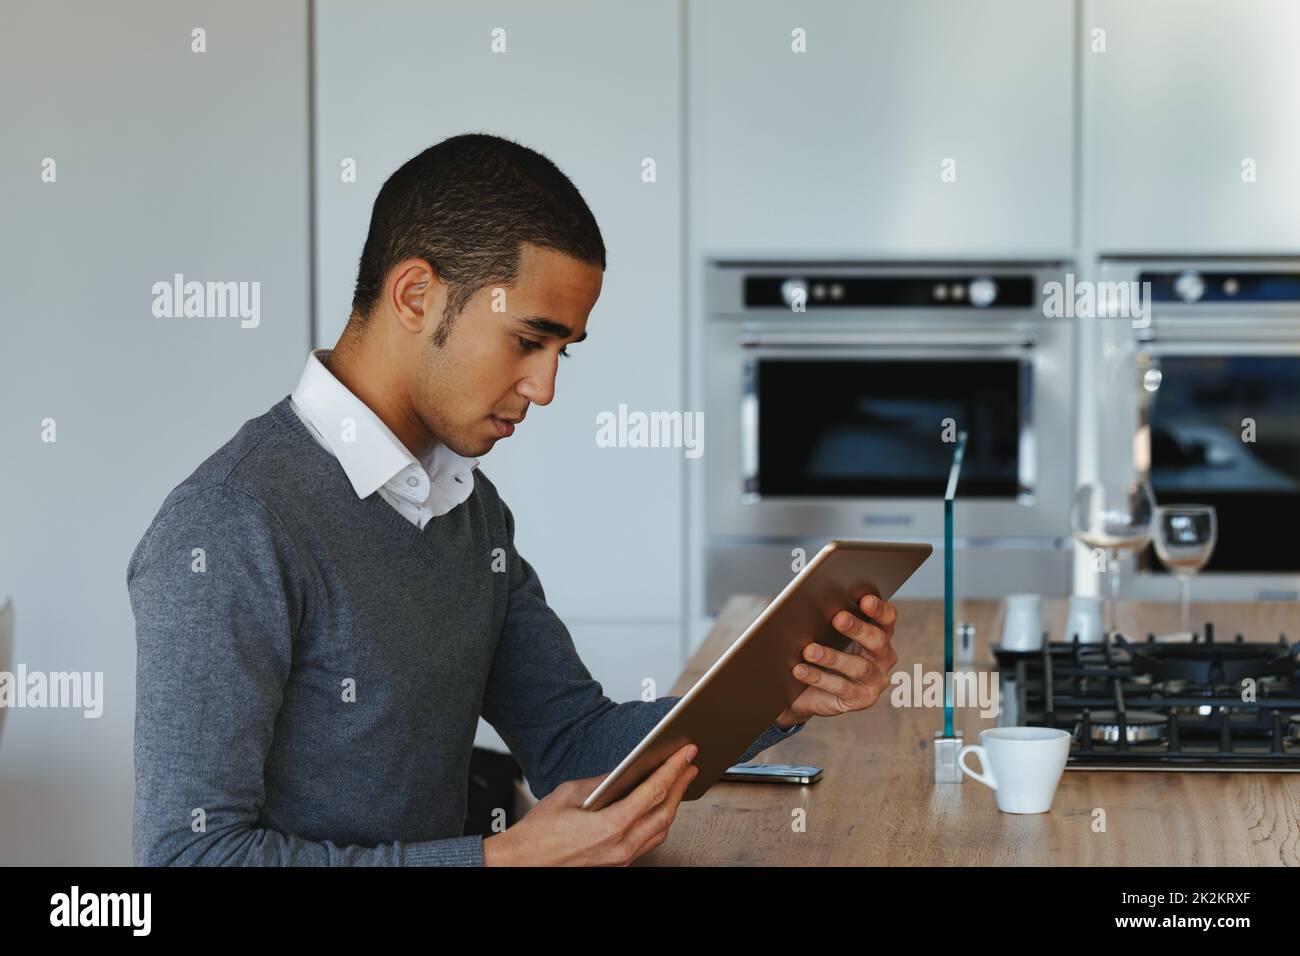 Young Black man seated at a kitchen table reading on a tablet pc Stock Photo